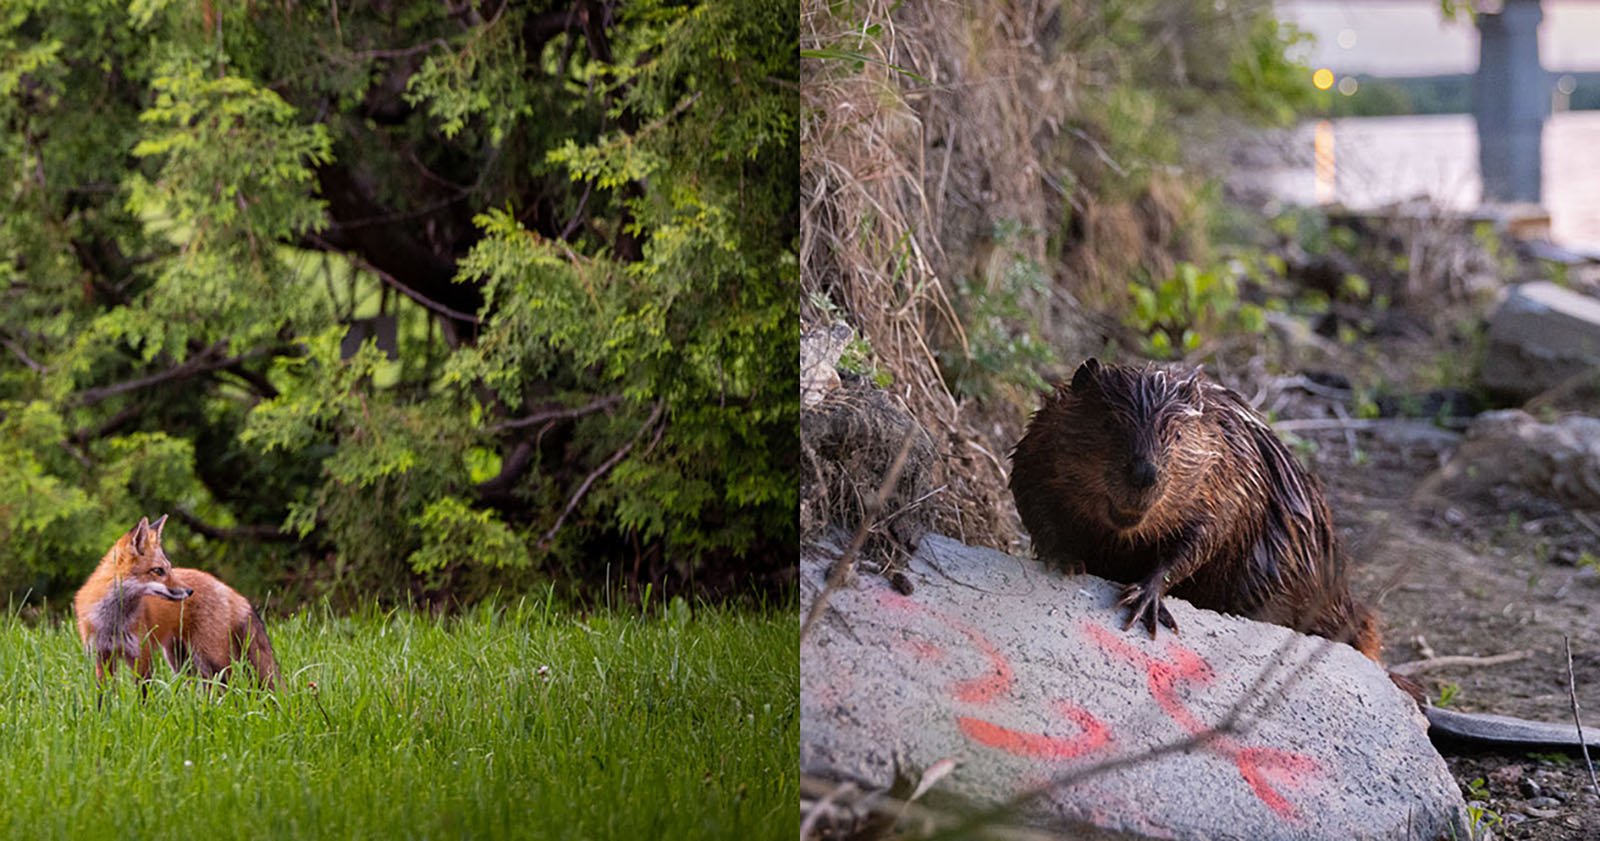 Urban Wildlife Photography Teaches People About Their Shy Neighbors